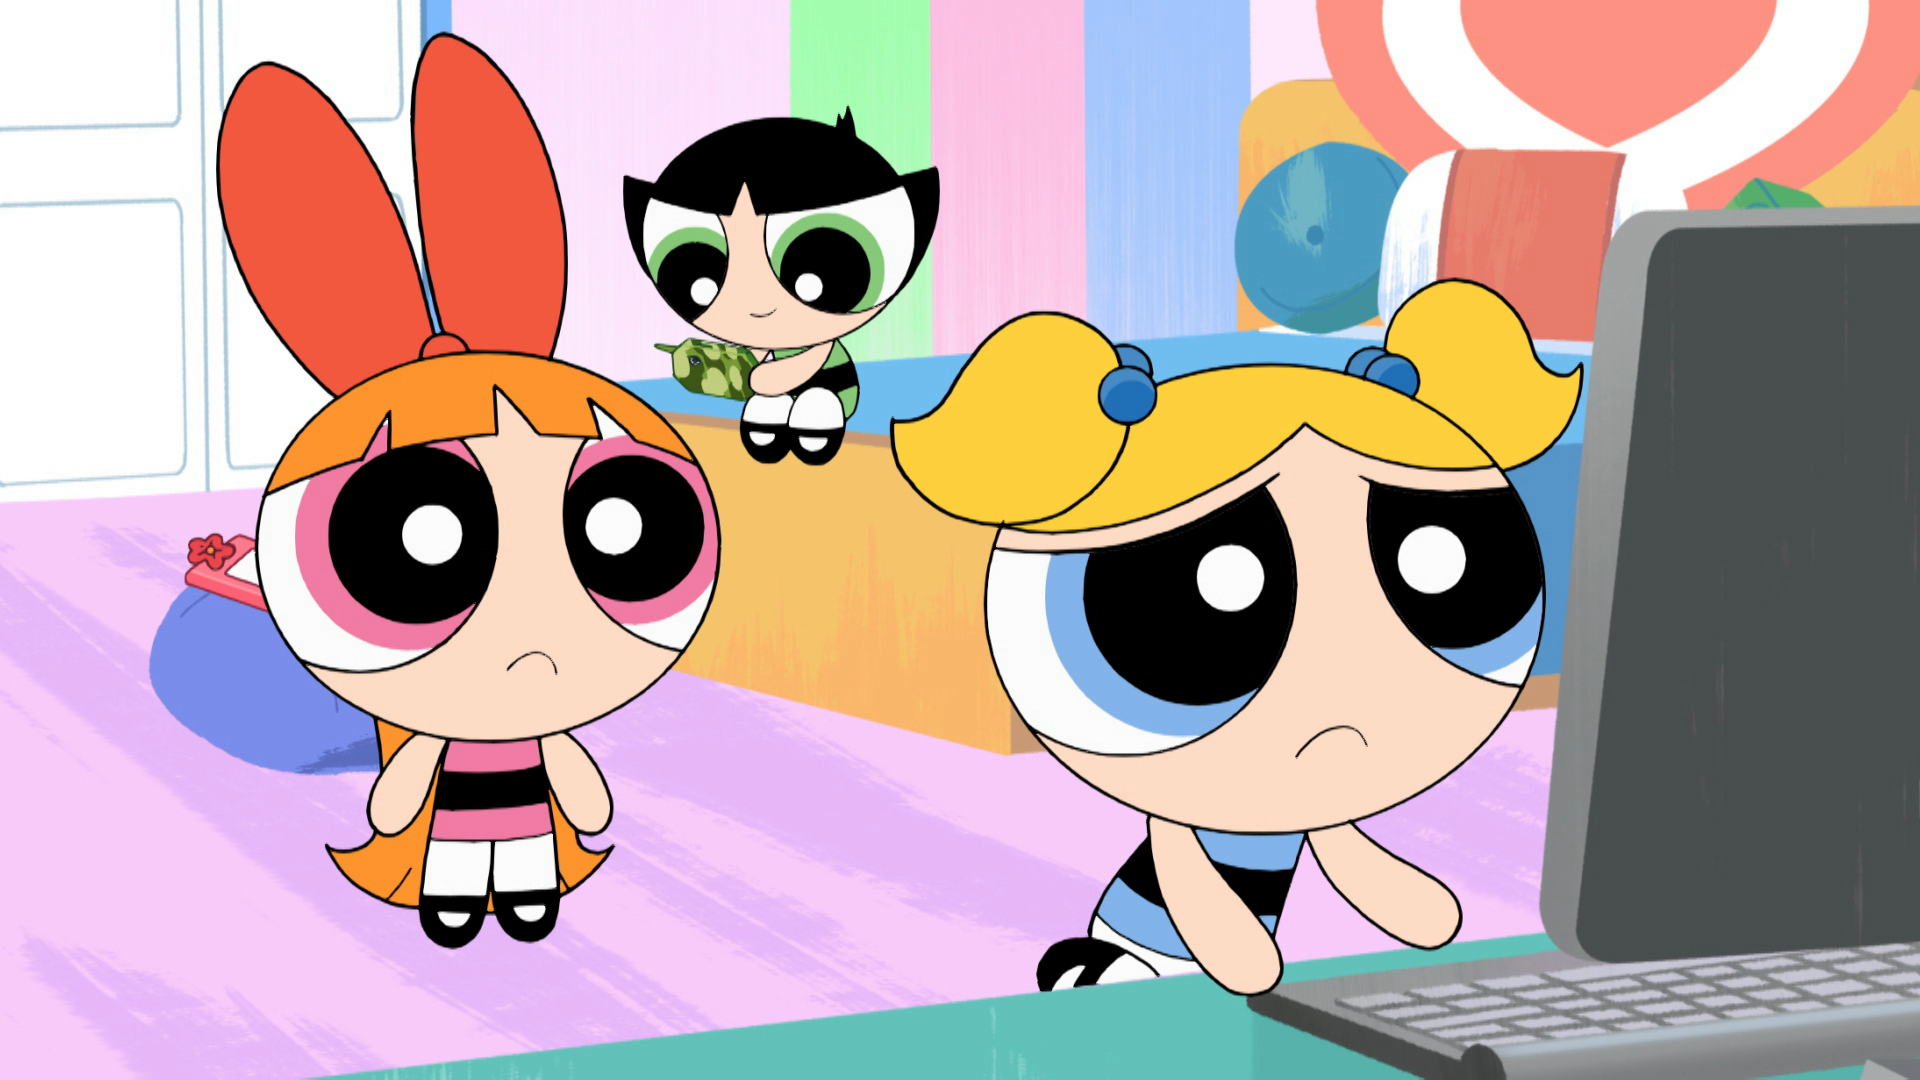 The Powerpuff Girls' will save the world through coding while tutoring viewers in Scratch